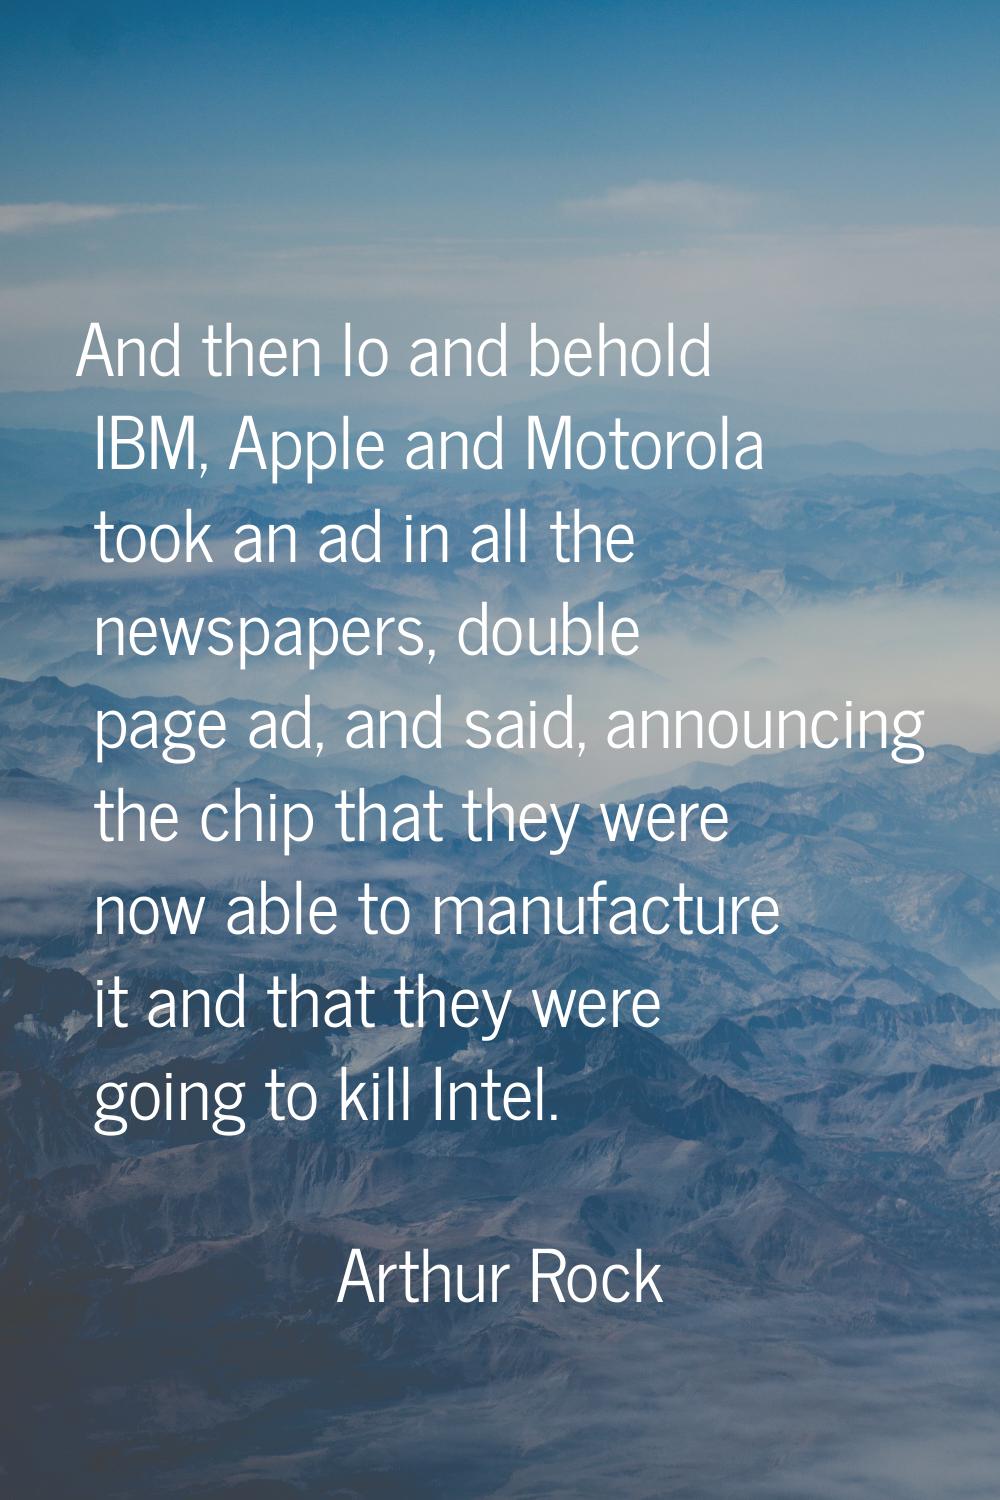 And then lo and behold IBM, Apple and Motorola took an ad in all the newspapers, double page ad, an